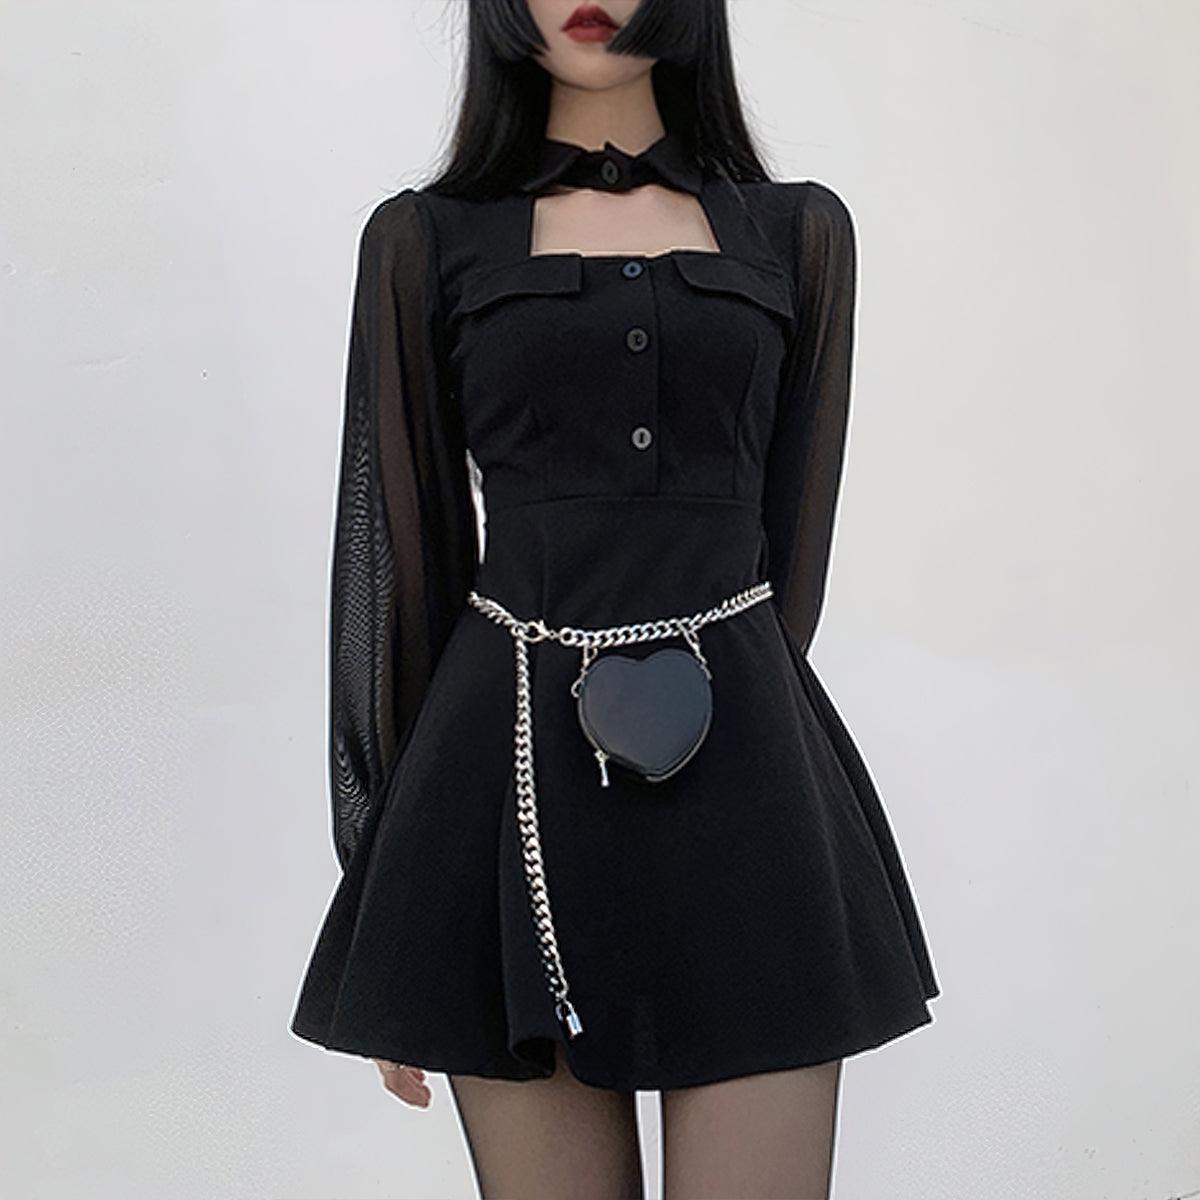 Black Mesh Sleeve Goth Aesthetic Dress - Aesthetic Clothes Shop